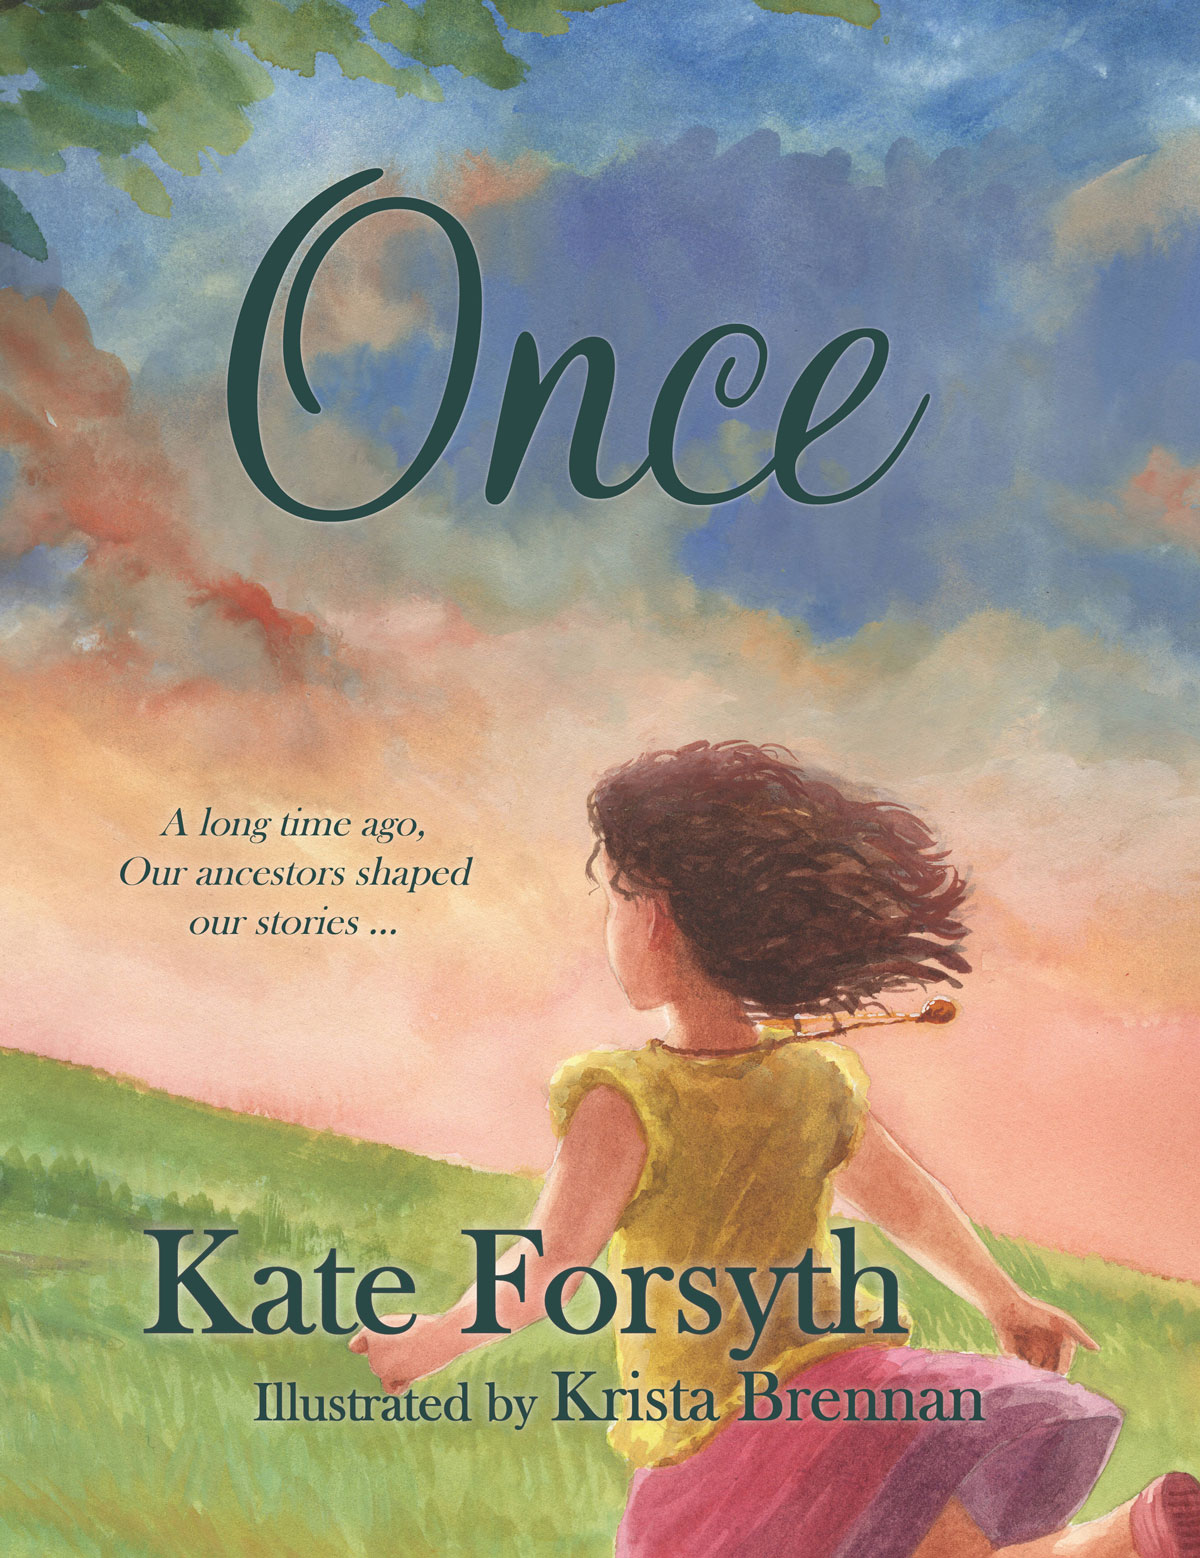 book review on once